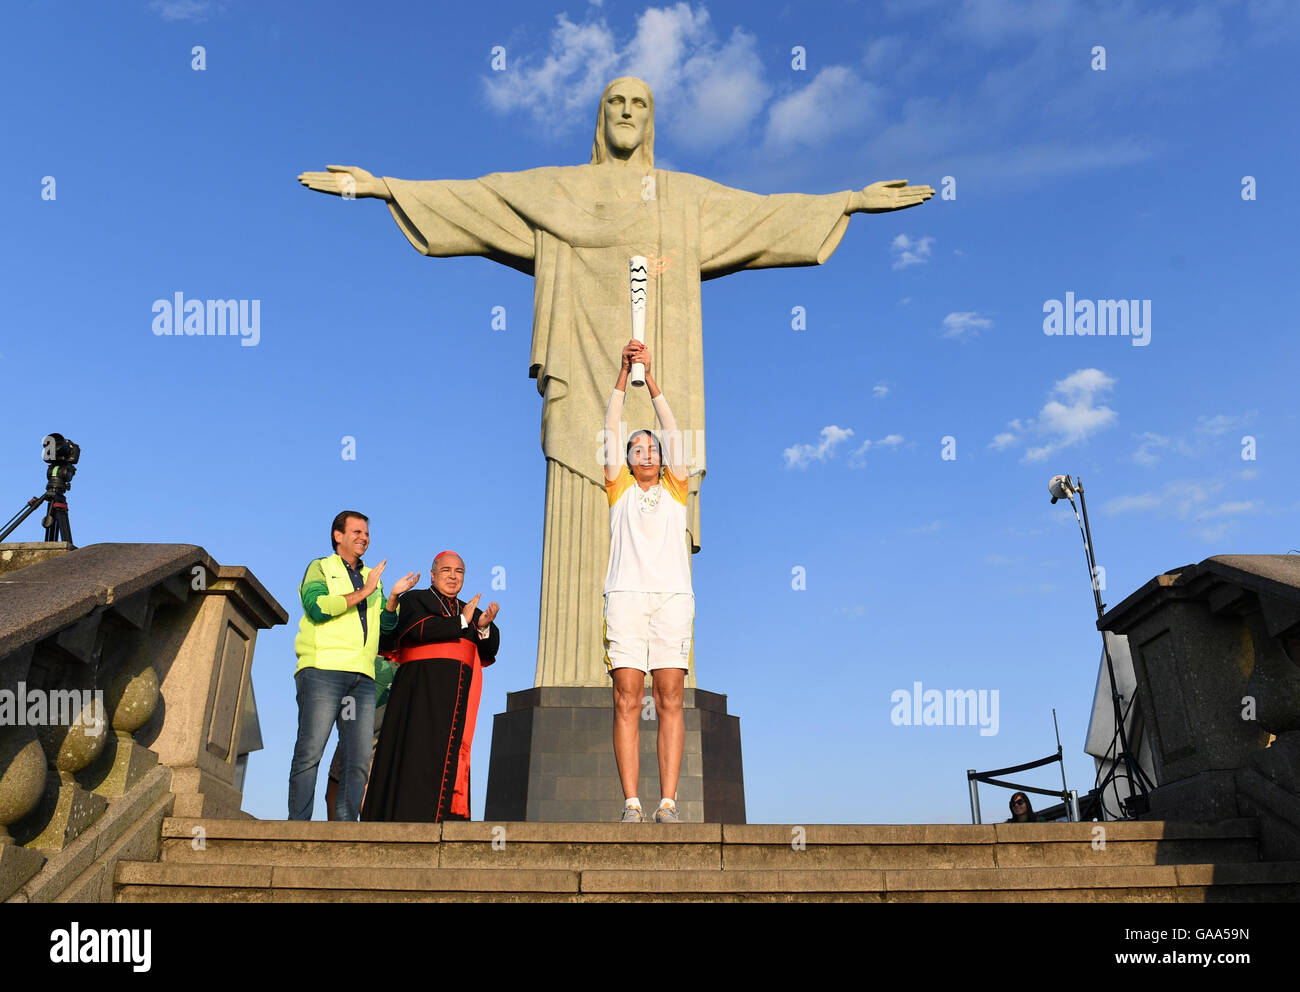 Rio de Janeiro, Brazil. 5th Aug, 2016. Brazilian former volleyball player Maria Isabel Barroso holds the Olympic torch next to Eduardo Paes (L), Mayor of Rio de Janeiro, and Archbishop of Rio de Janeiro, Orani Joao Tempesta (2-L), during the Olympic Torch Relay in front of Christ the Redeemer statue early in the morning prior to the Rio 2016 Olympic Games in Rio de Janeiro, Brazil, 5 August 2016. Rio 2016 Olympic Games take place from 05 to 21 August. Photo: Sebastian Kahnert/dpa/Alamy Live News Stock Photo